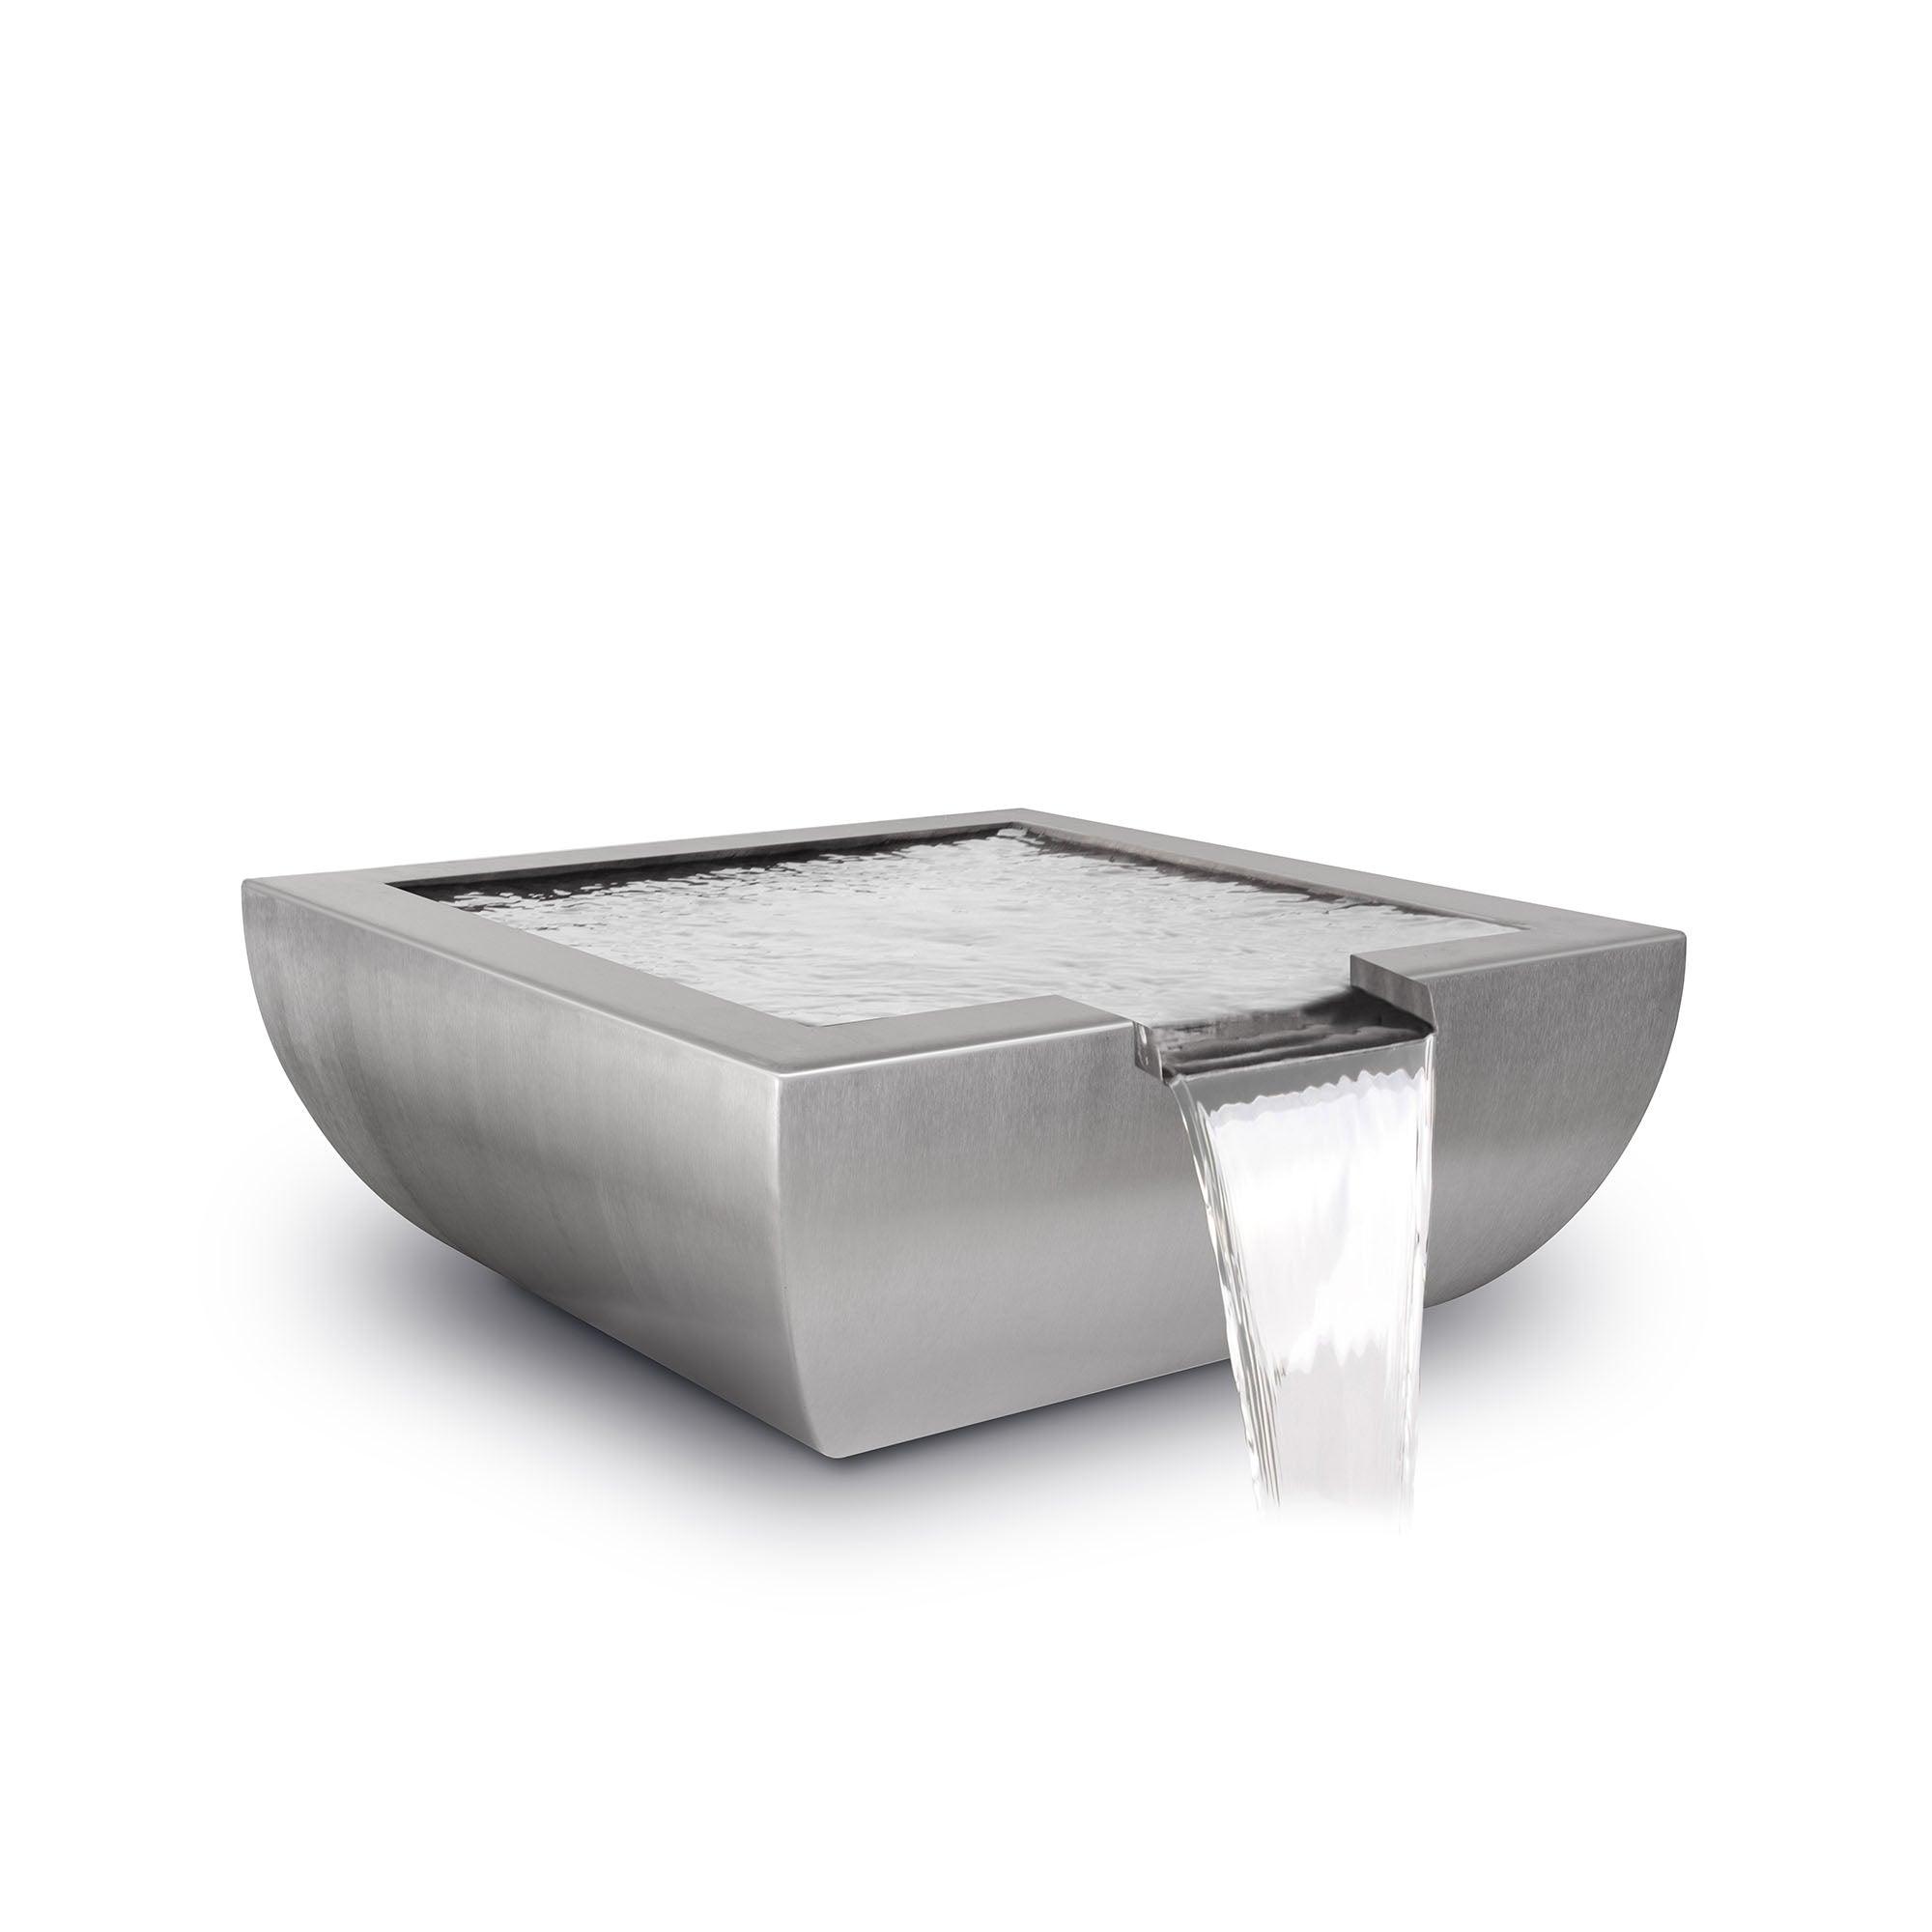 The Outdoor Plus Avalon Metal Water Bowls